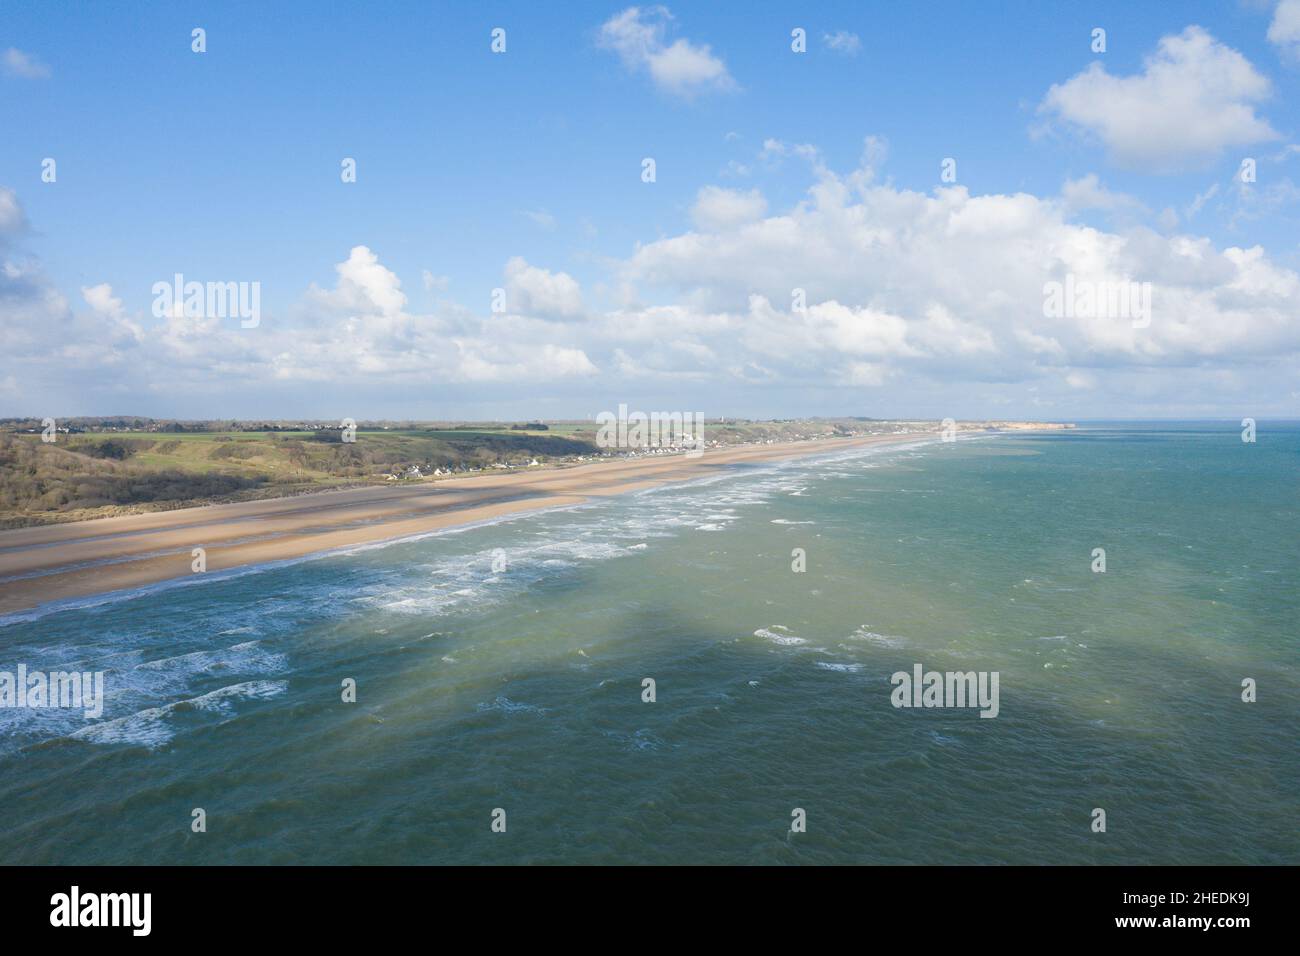 This landscape photo was taken in Europe, France, Normandy, towards Arromanches, Colleville, in the spring. We can see the fine sandy beach of Omaha b Stock Photo